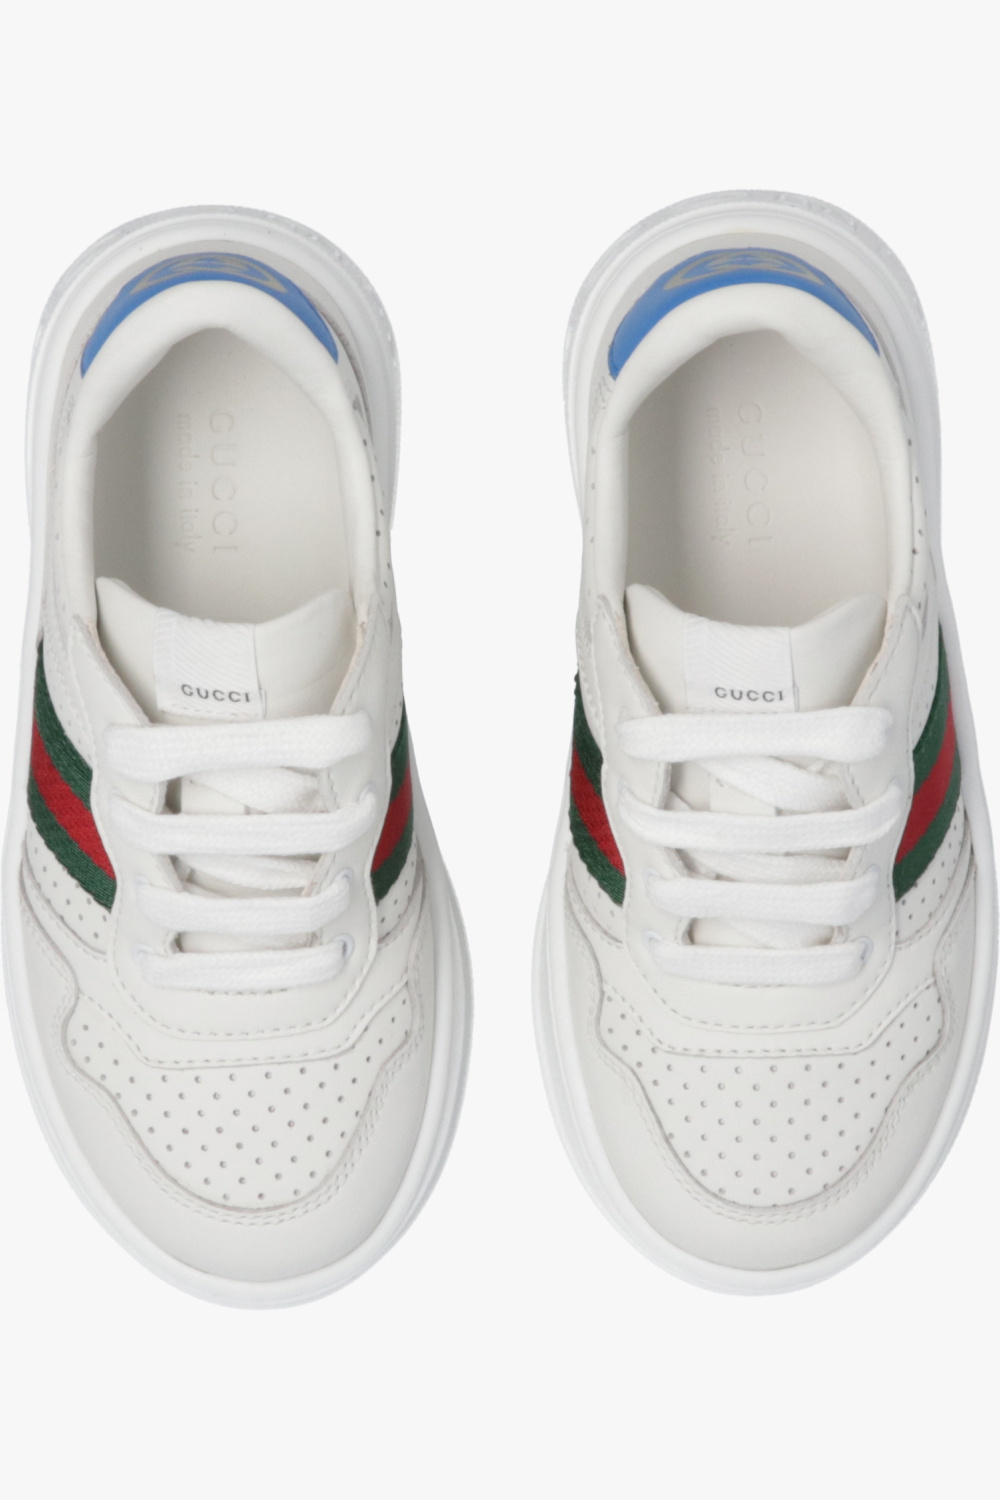 gucci eau Kids Leather sneakers